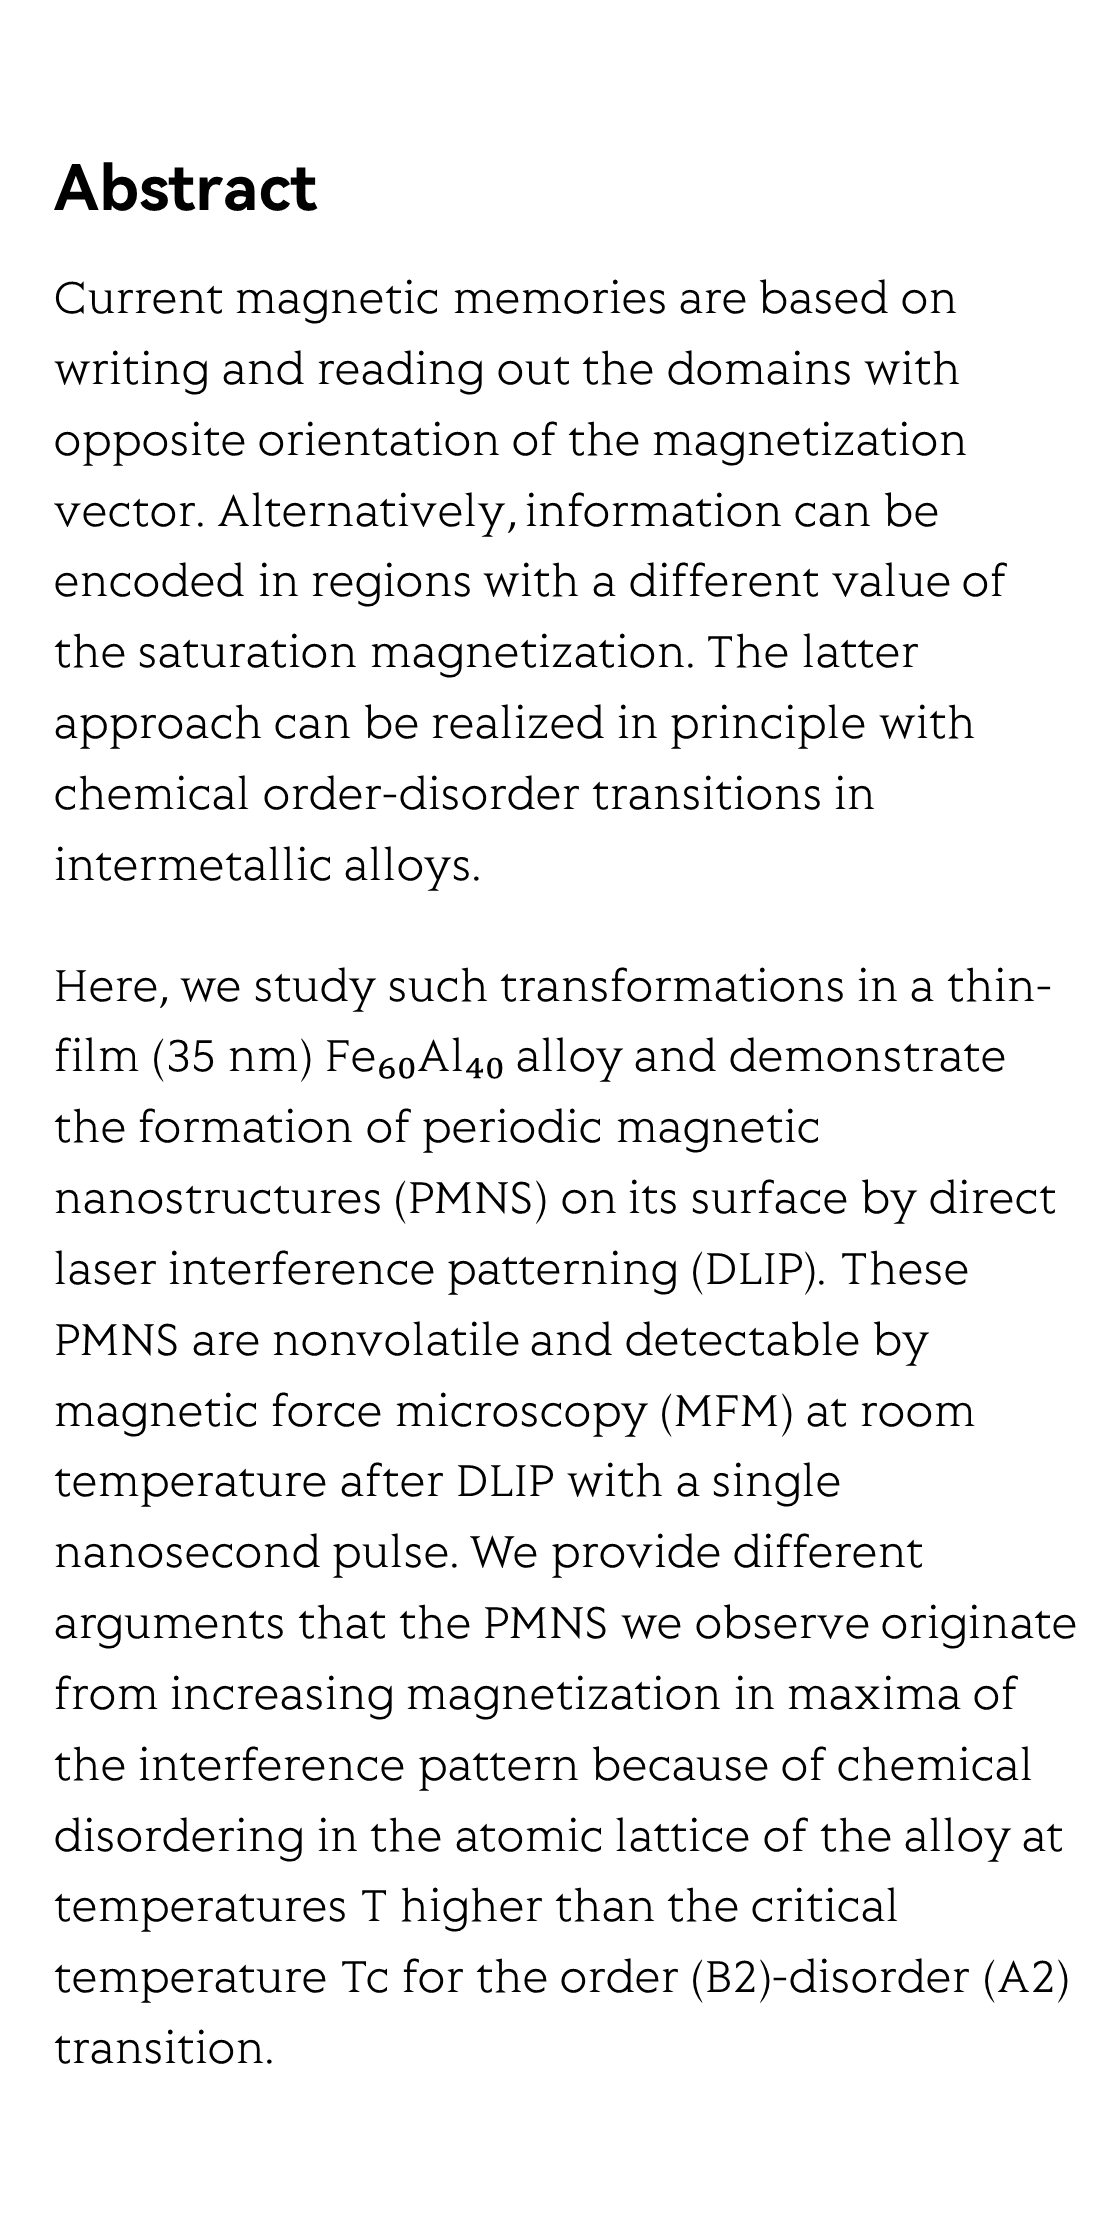 Direct laser interference patterning of nonvolatile magnetic nanostructures in Fe₆₀Al₄₀ alloy via disorder-induced ferromagnetism_2